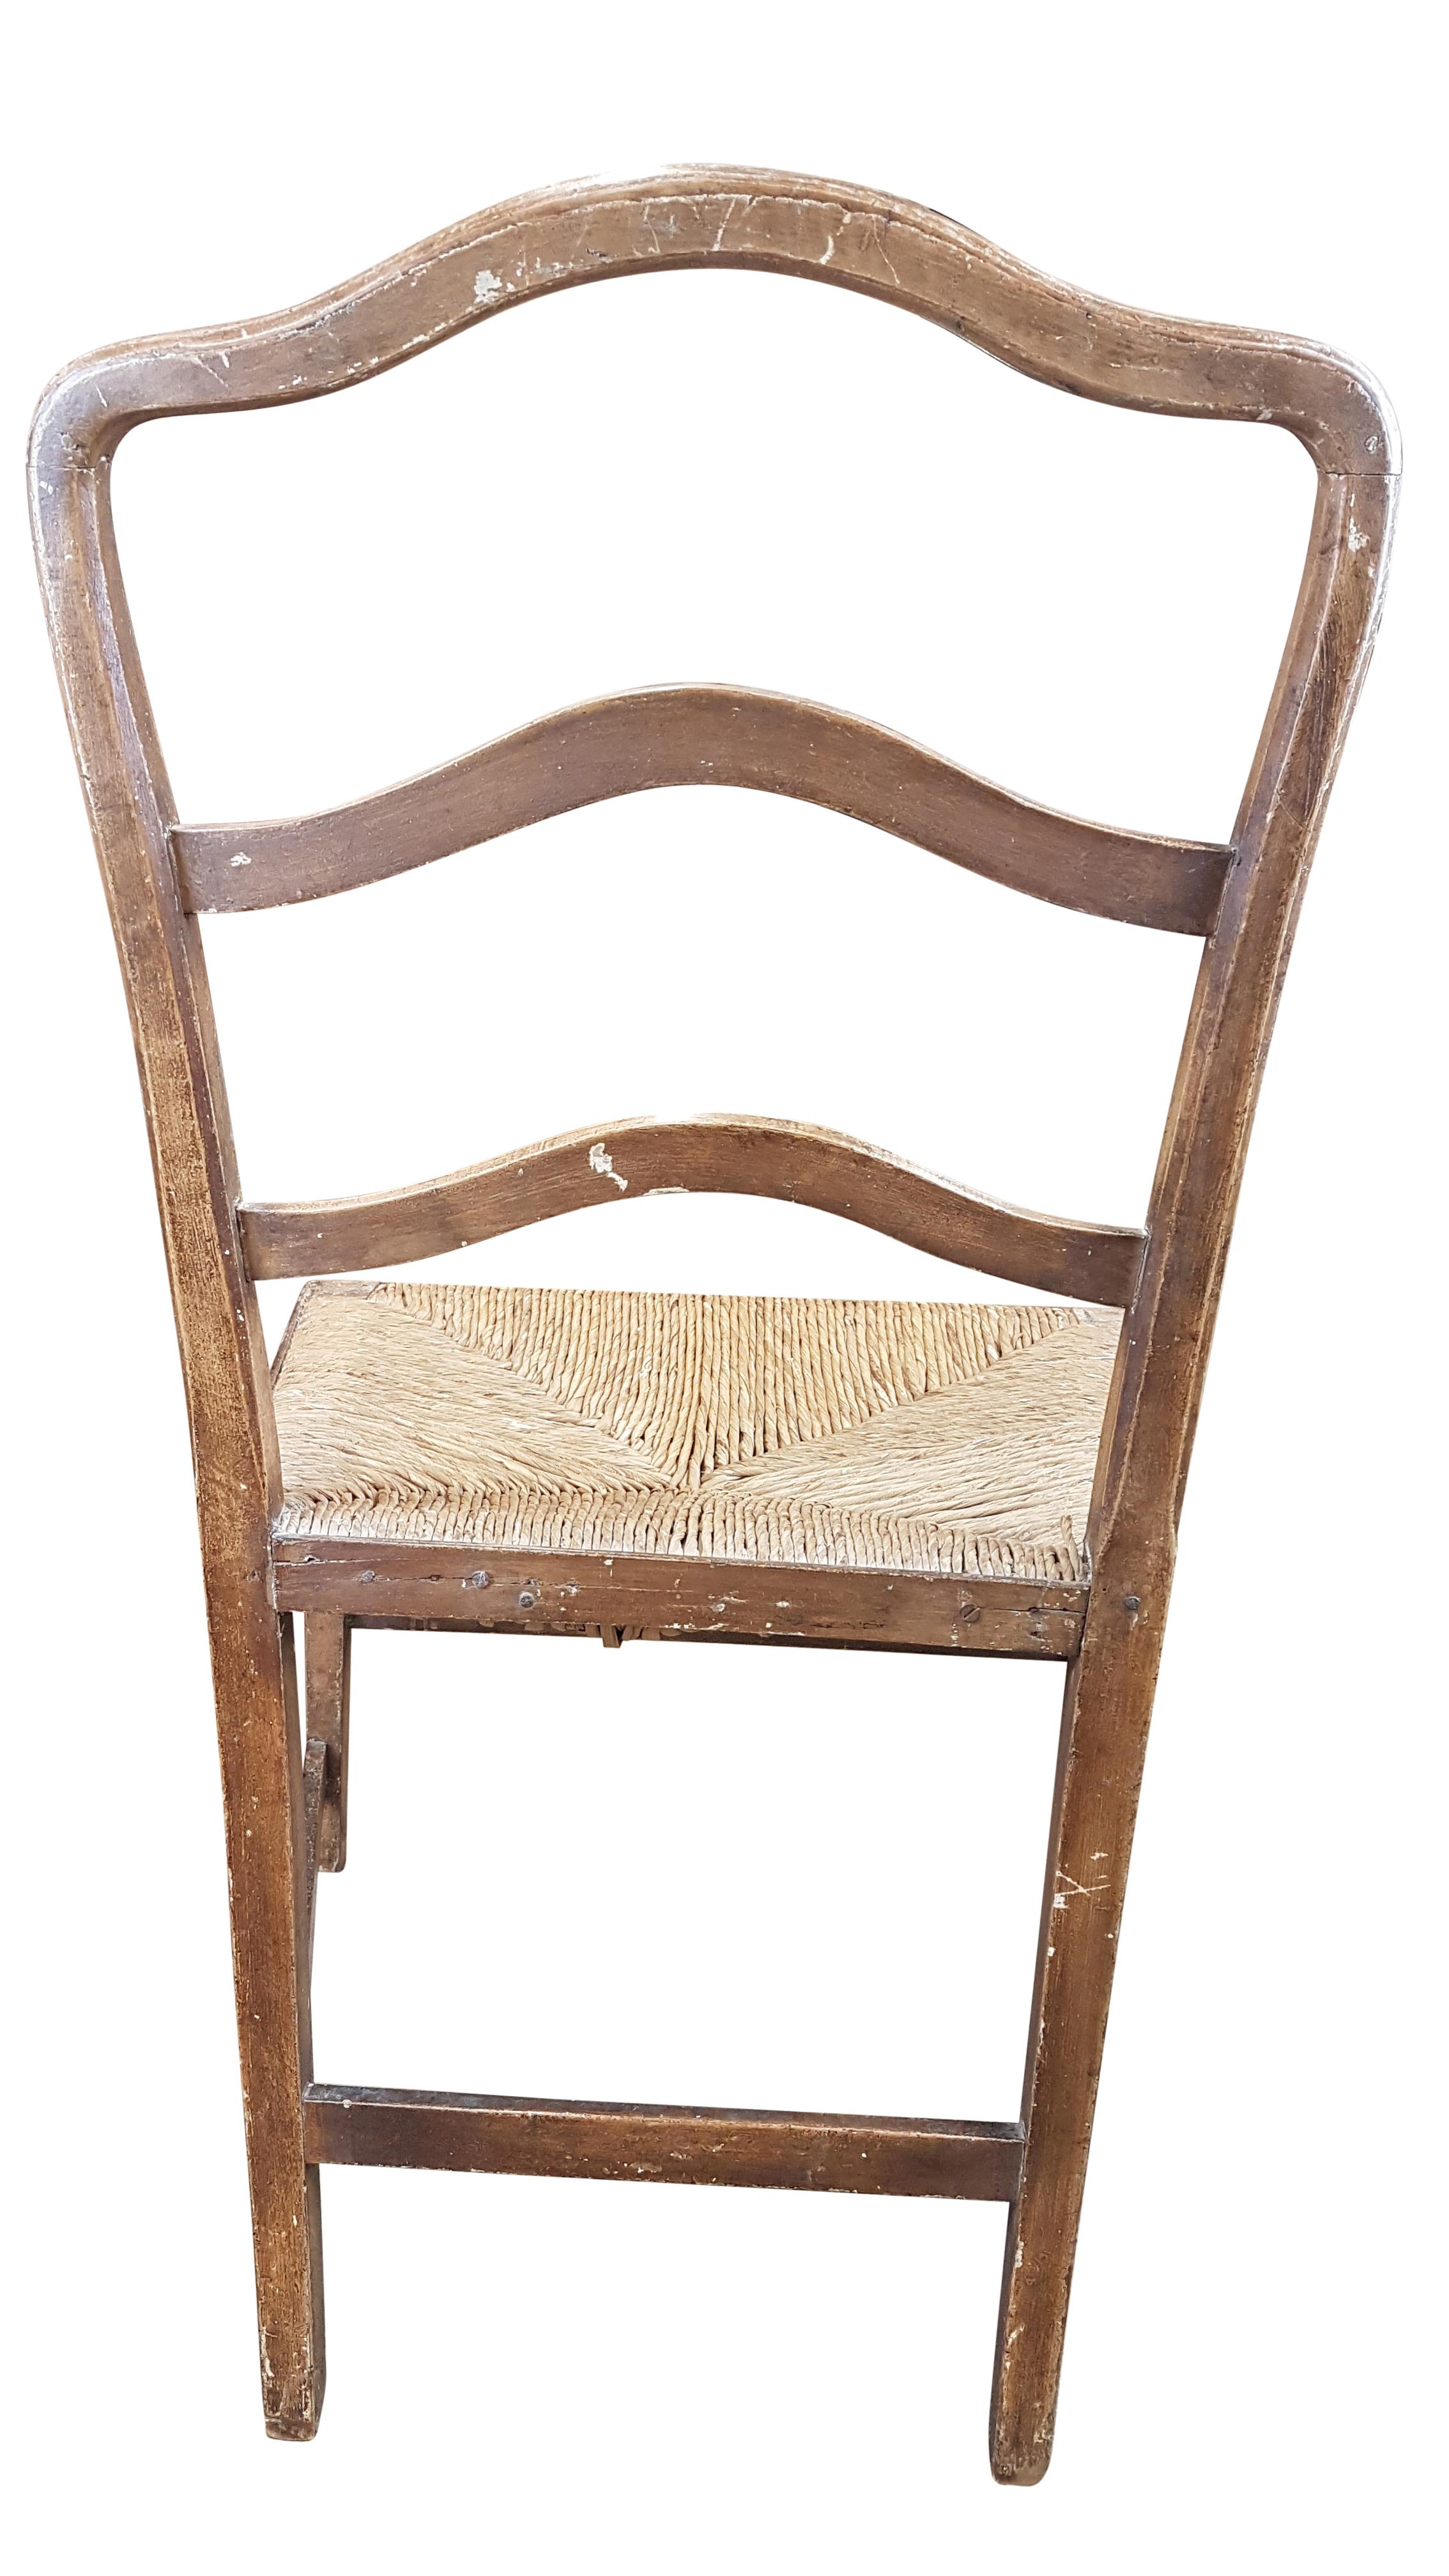 Early 19th Century Georgian Chair in Original Painted Decoration For Sale 6